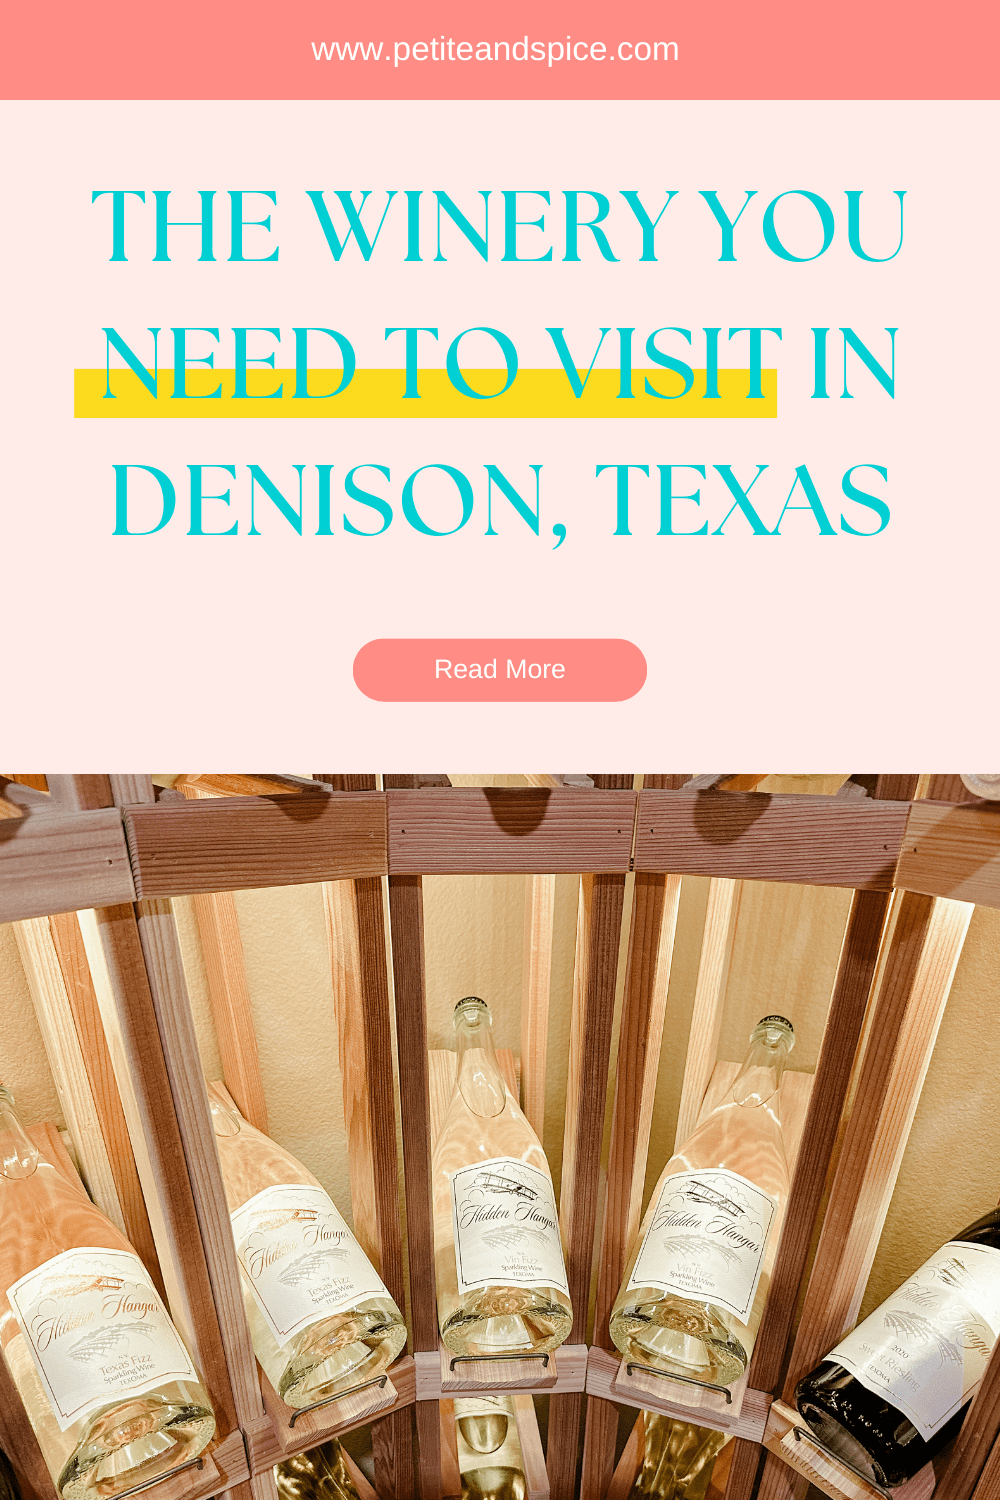 The Winery You Need to Visit In Denison, Texas